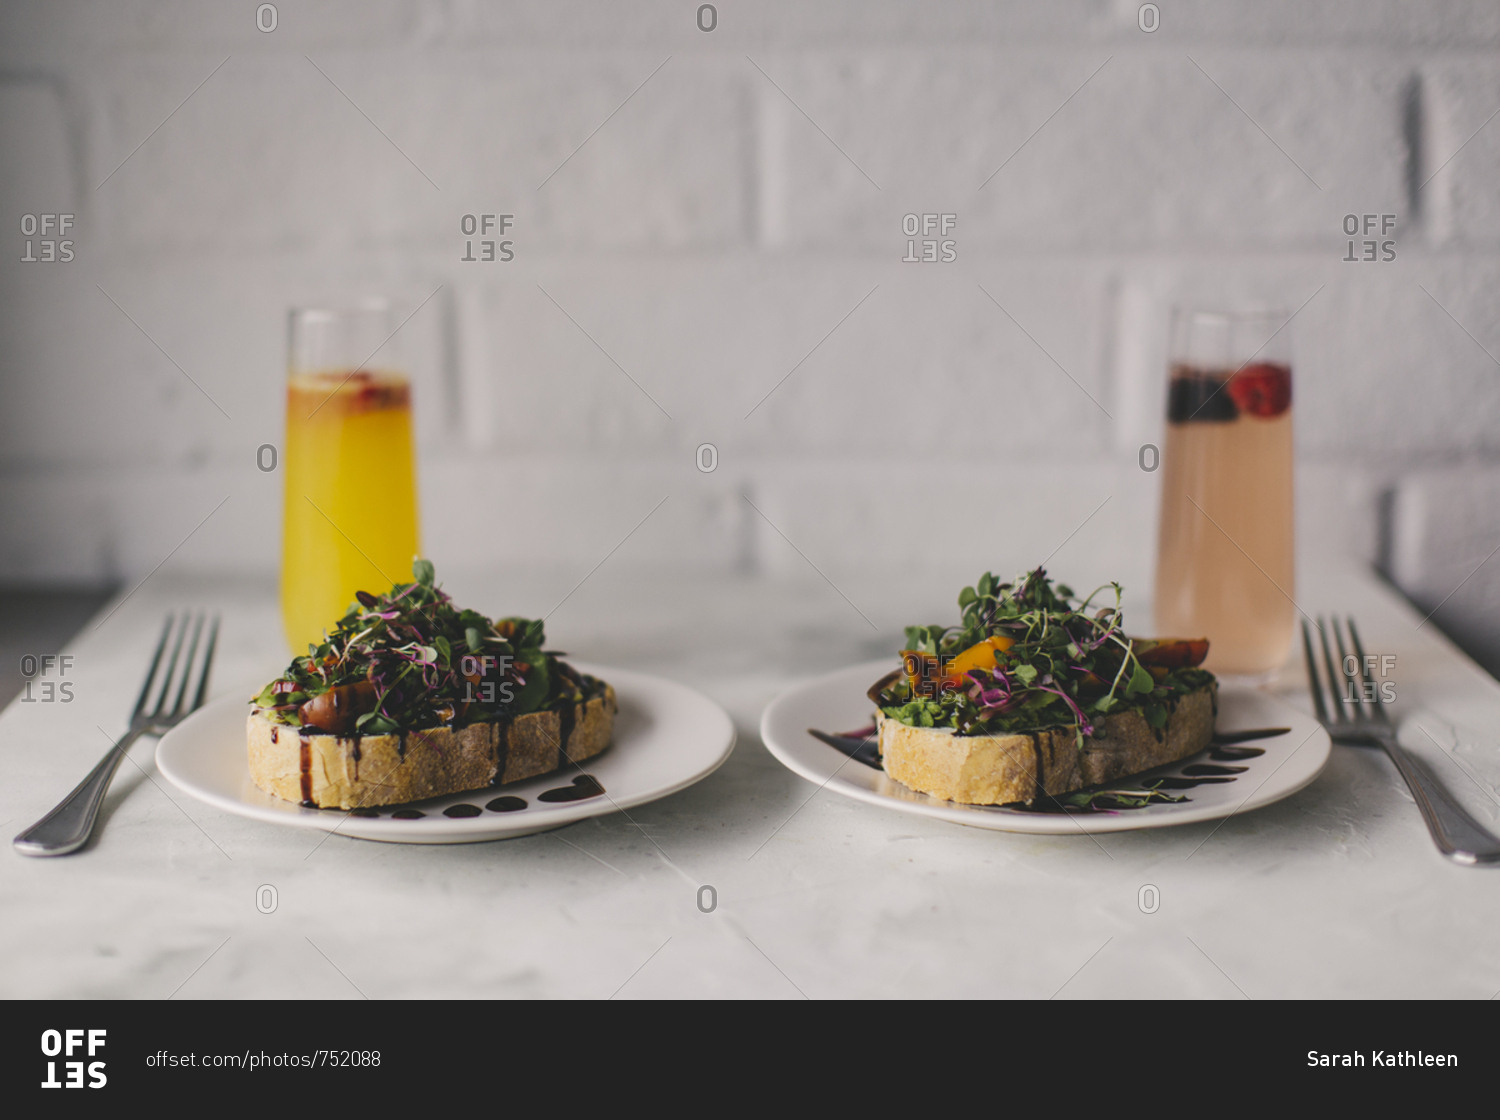 Two plates of toast topped with microgreen salad, tomatoes, and balsamic vinegar served with drinks